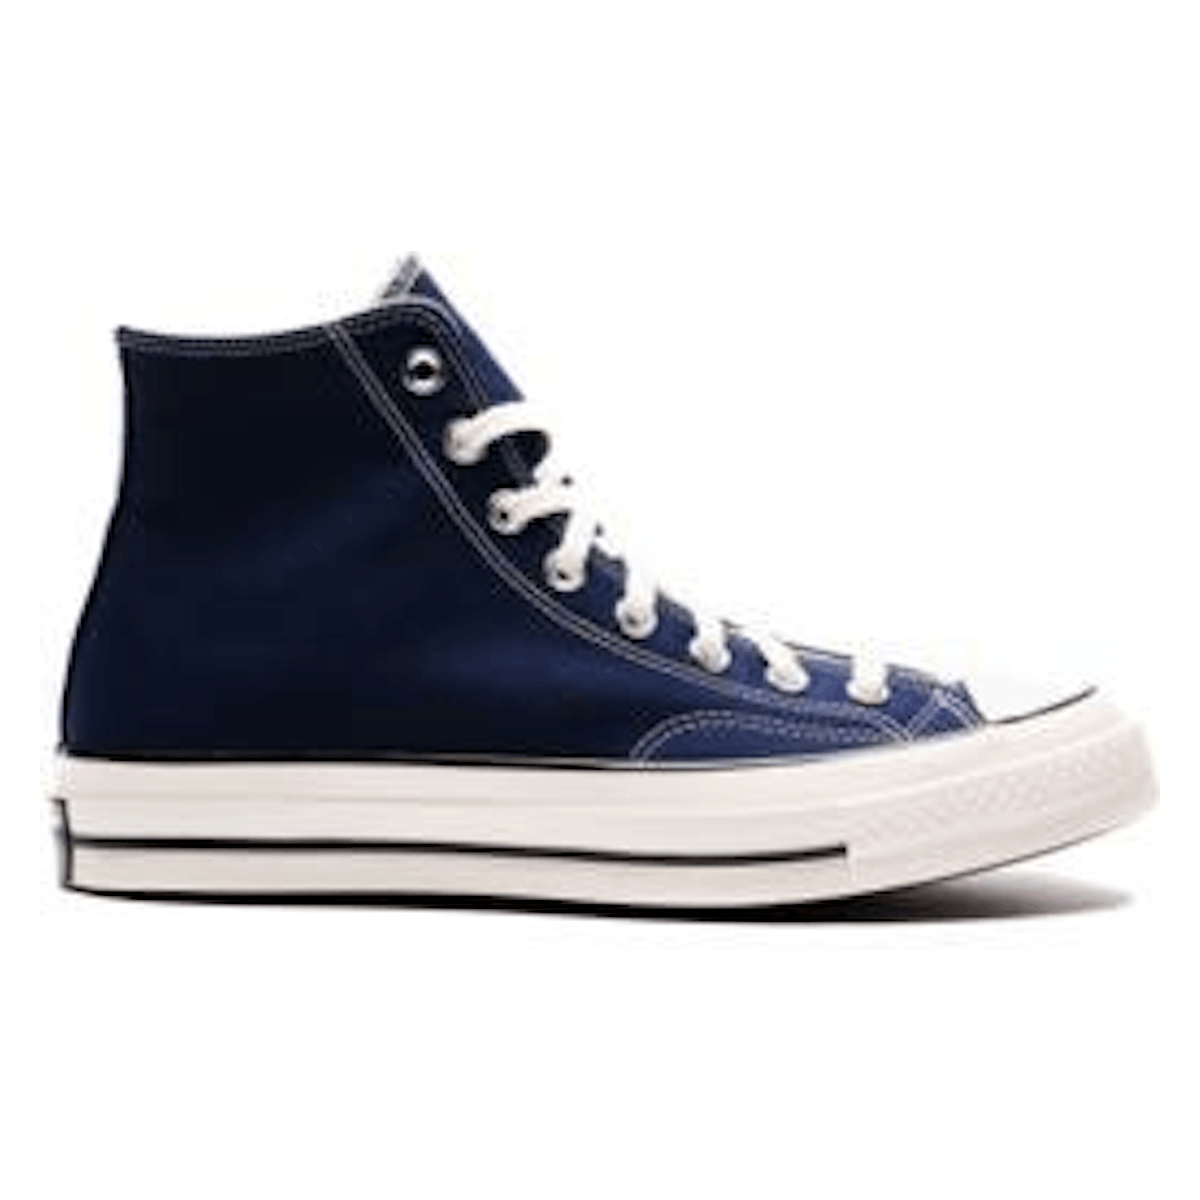 Converse Chuck Taylor All-Star 70 Hi Recycled Canvas Midnight Navy